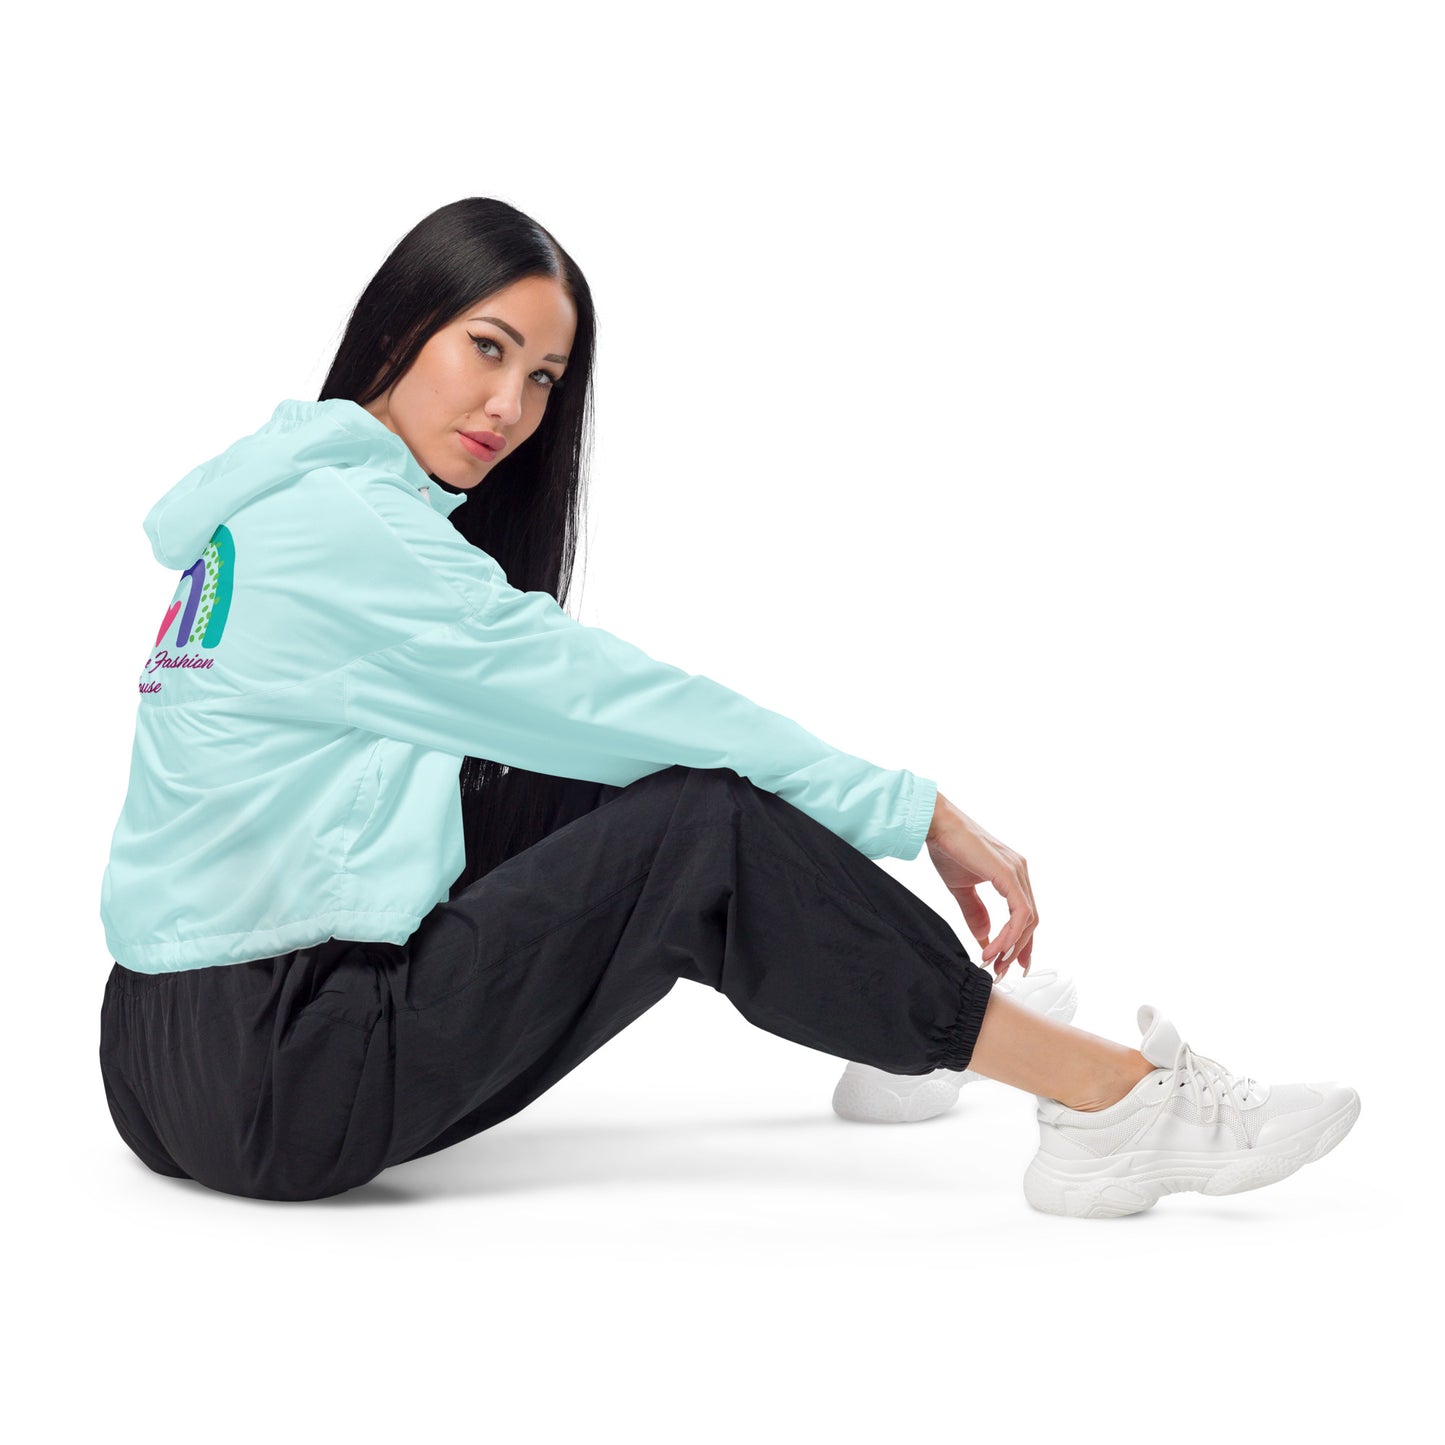 Baby Blue Signature -Cropped Wind Breaker